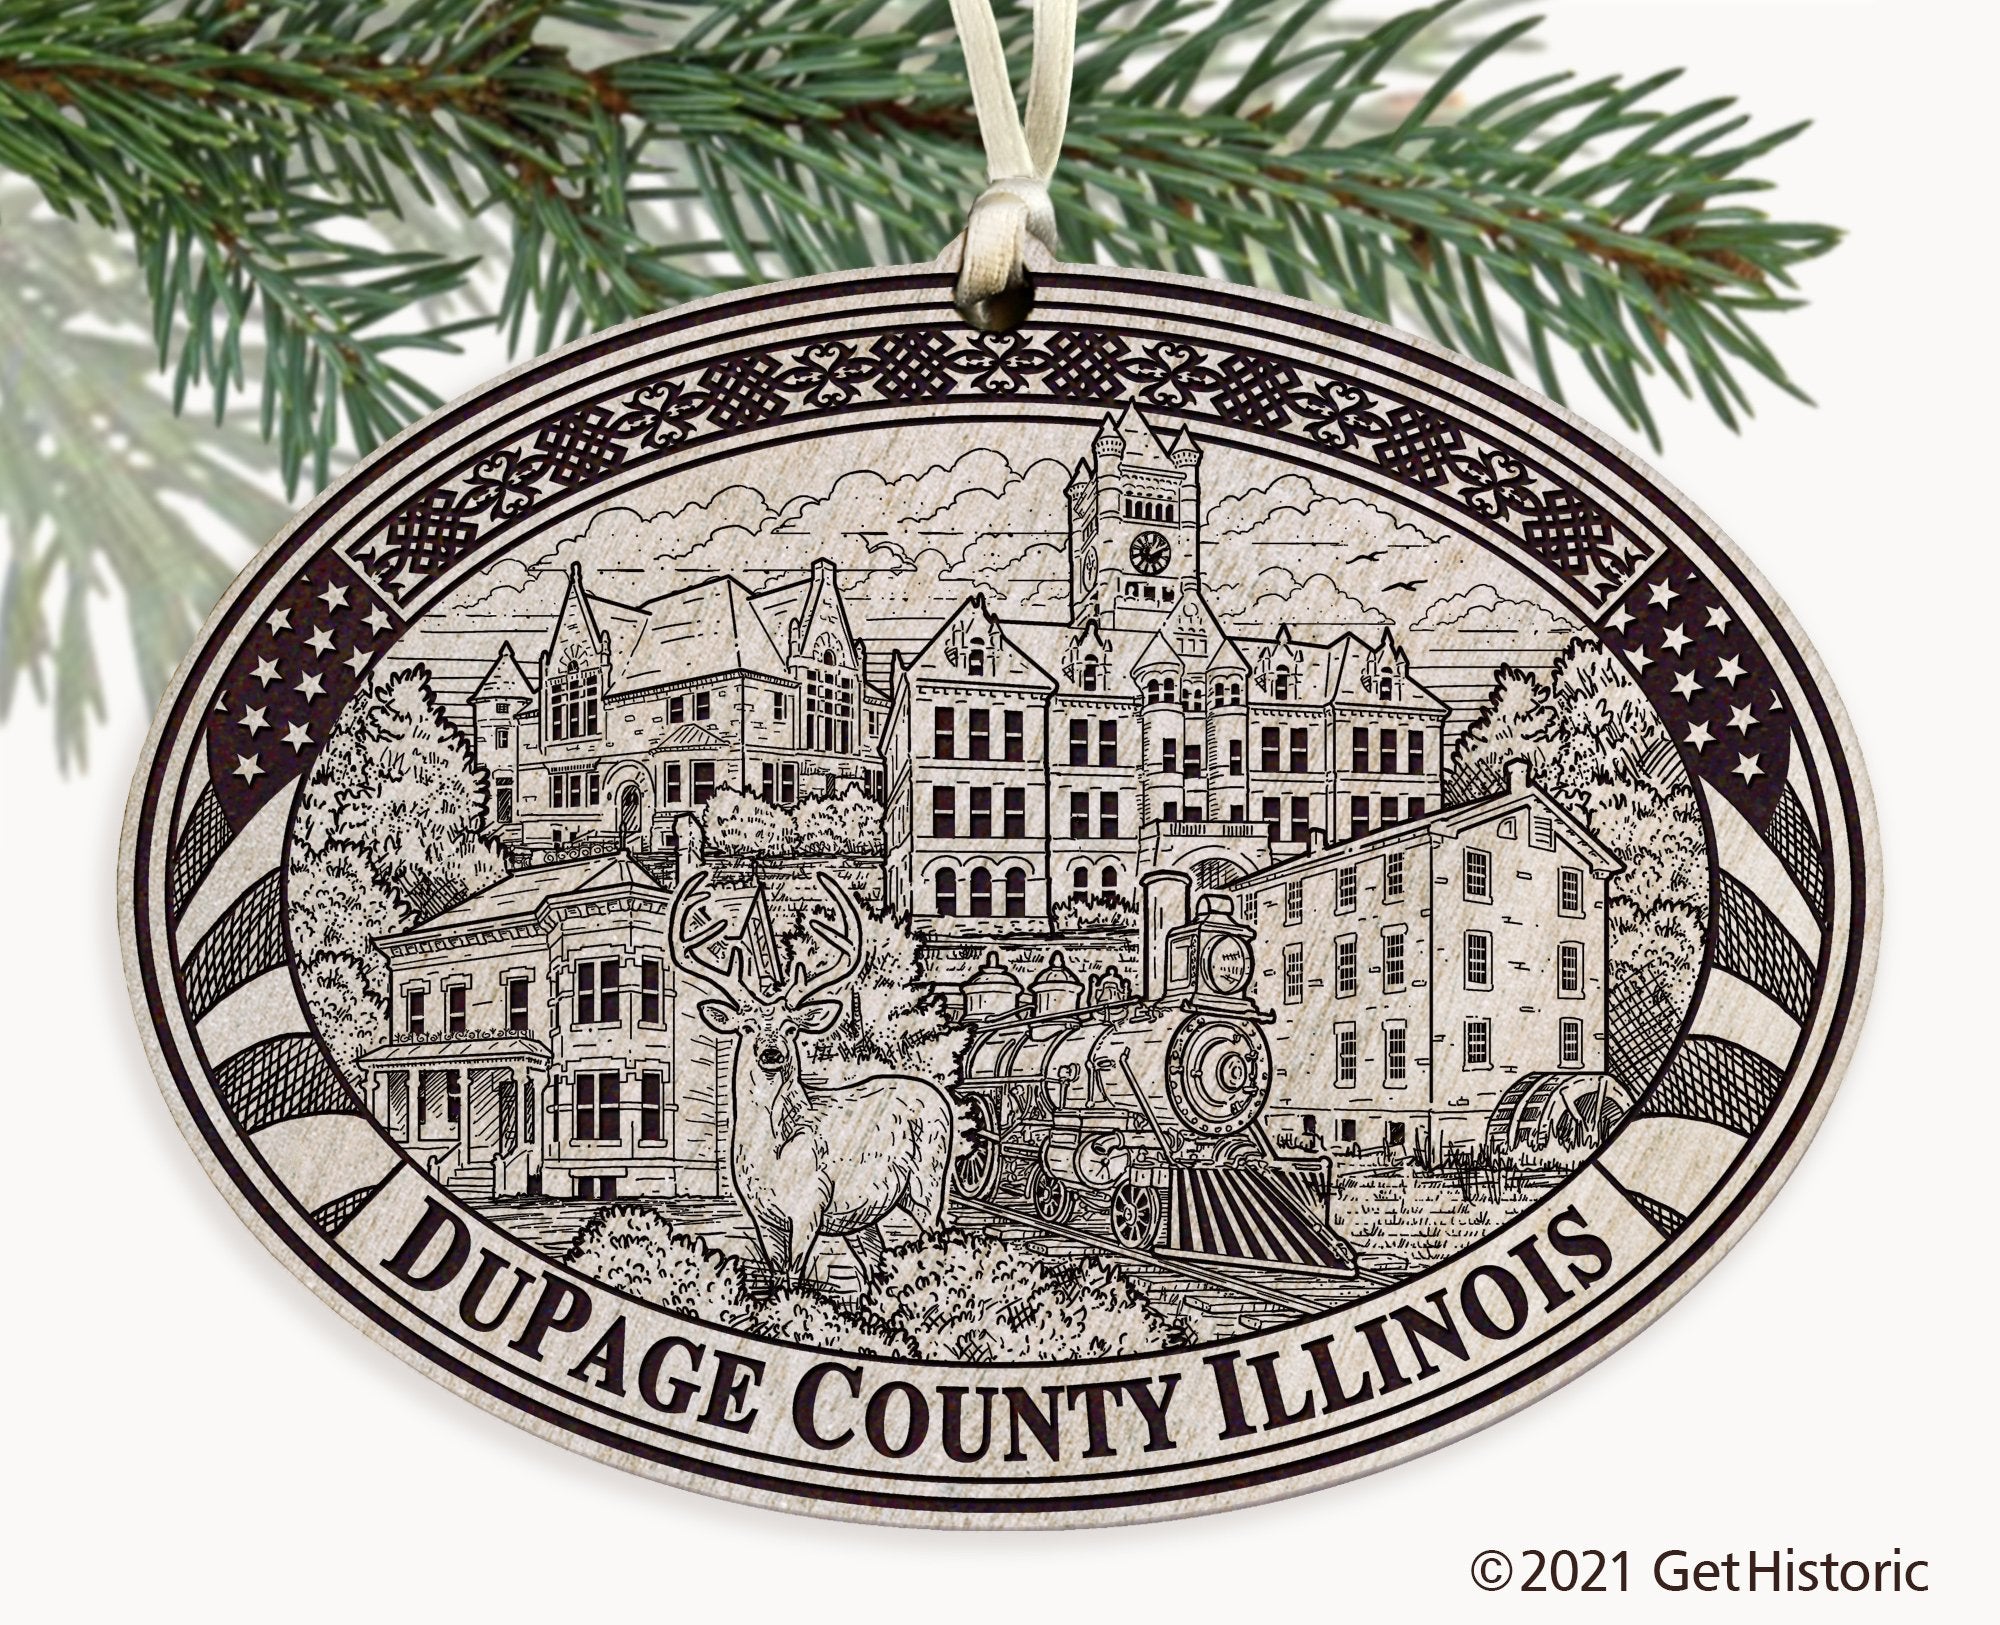 DuPage County Illinois Engraved Ornament